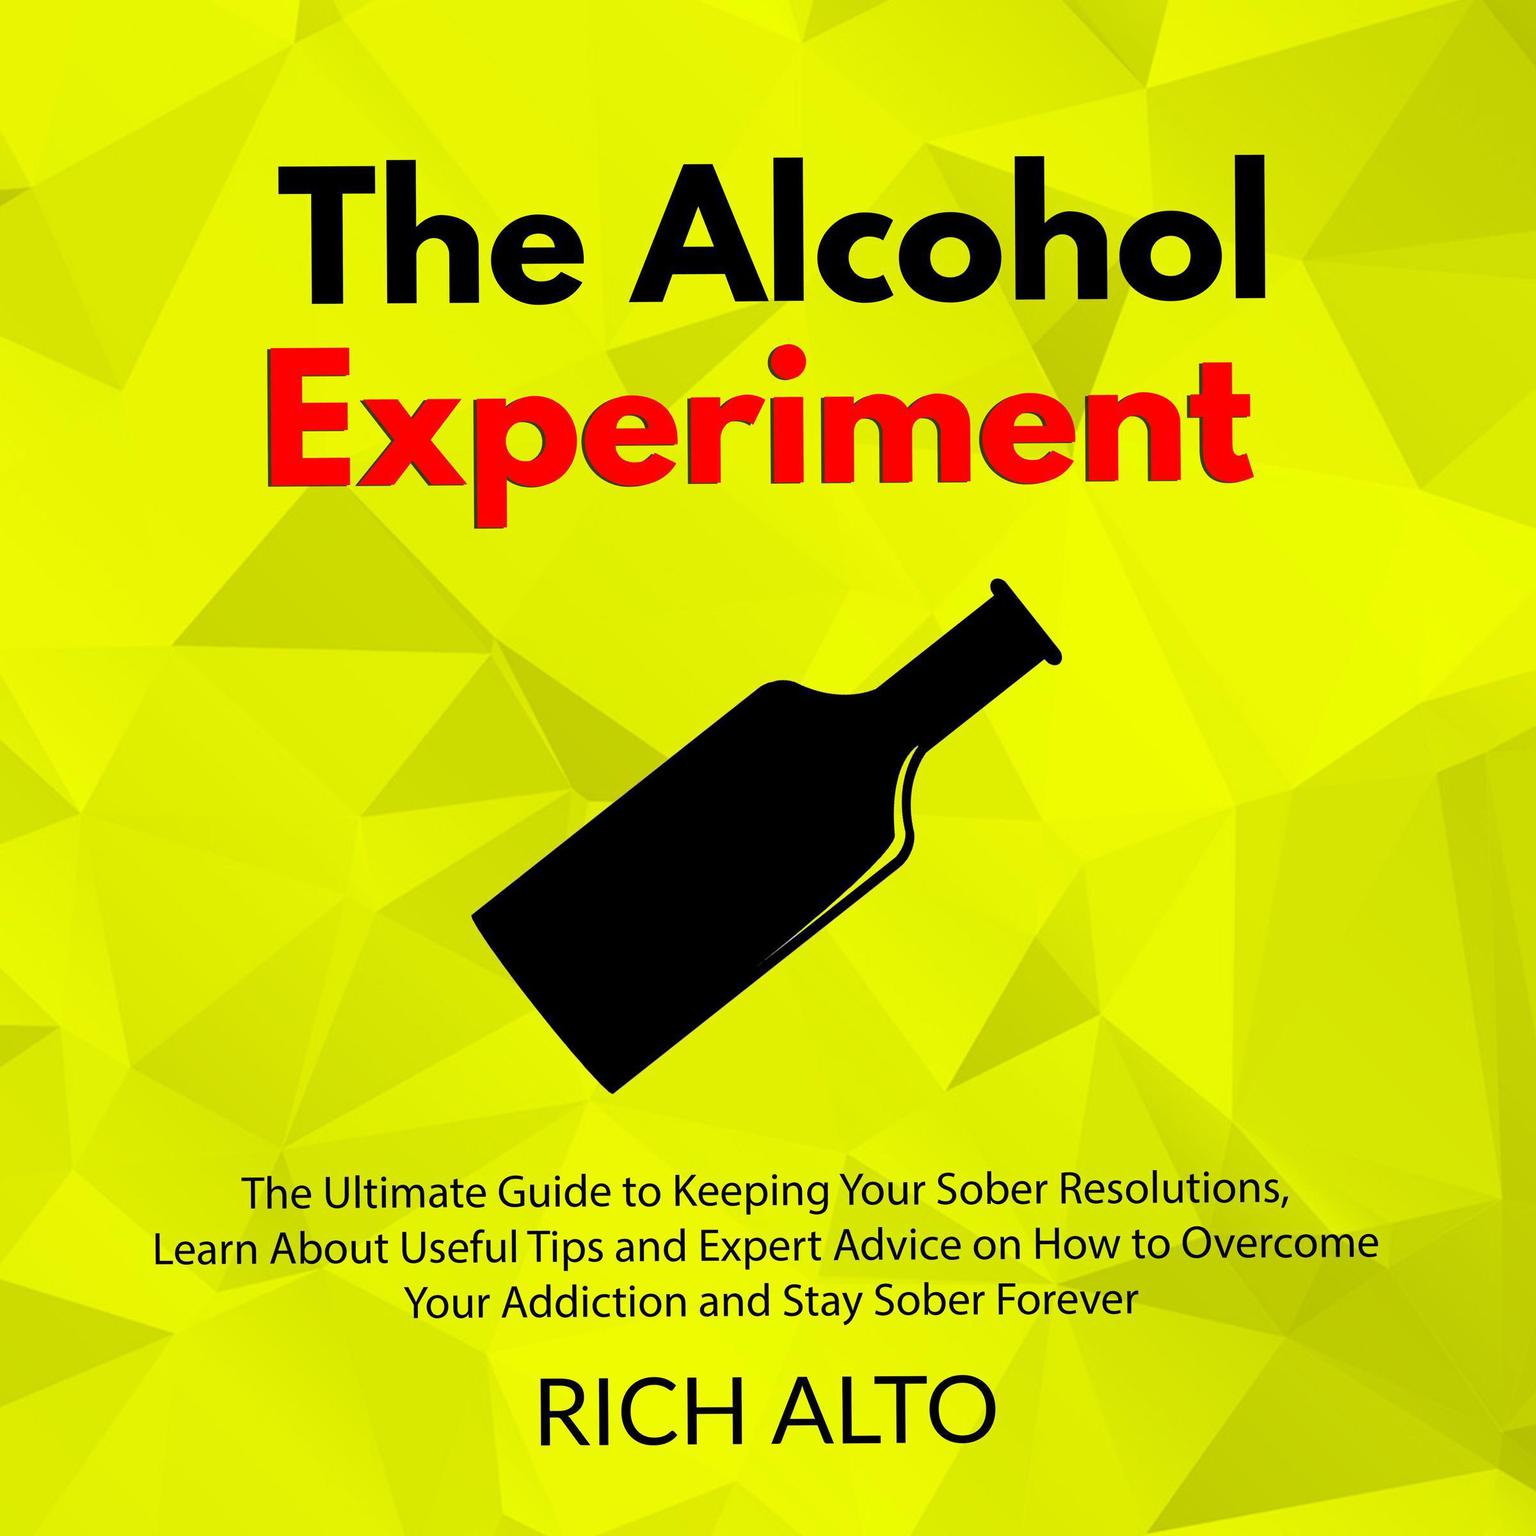 The Alcohol Experiment: The Ultimate Guide to Keeping Your Sober Resolutions, Learn About Useful Tips and Expert Advice on How to Overcome Your Addiction and Stay Sober Forever Audiobook, by Rich Alto